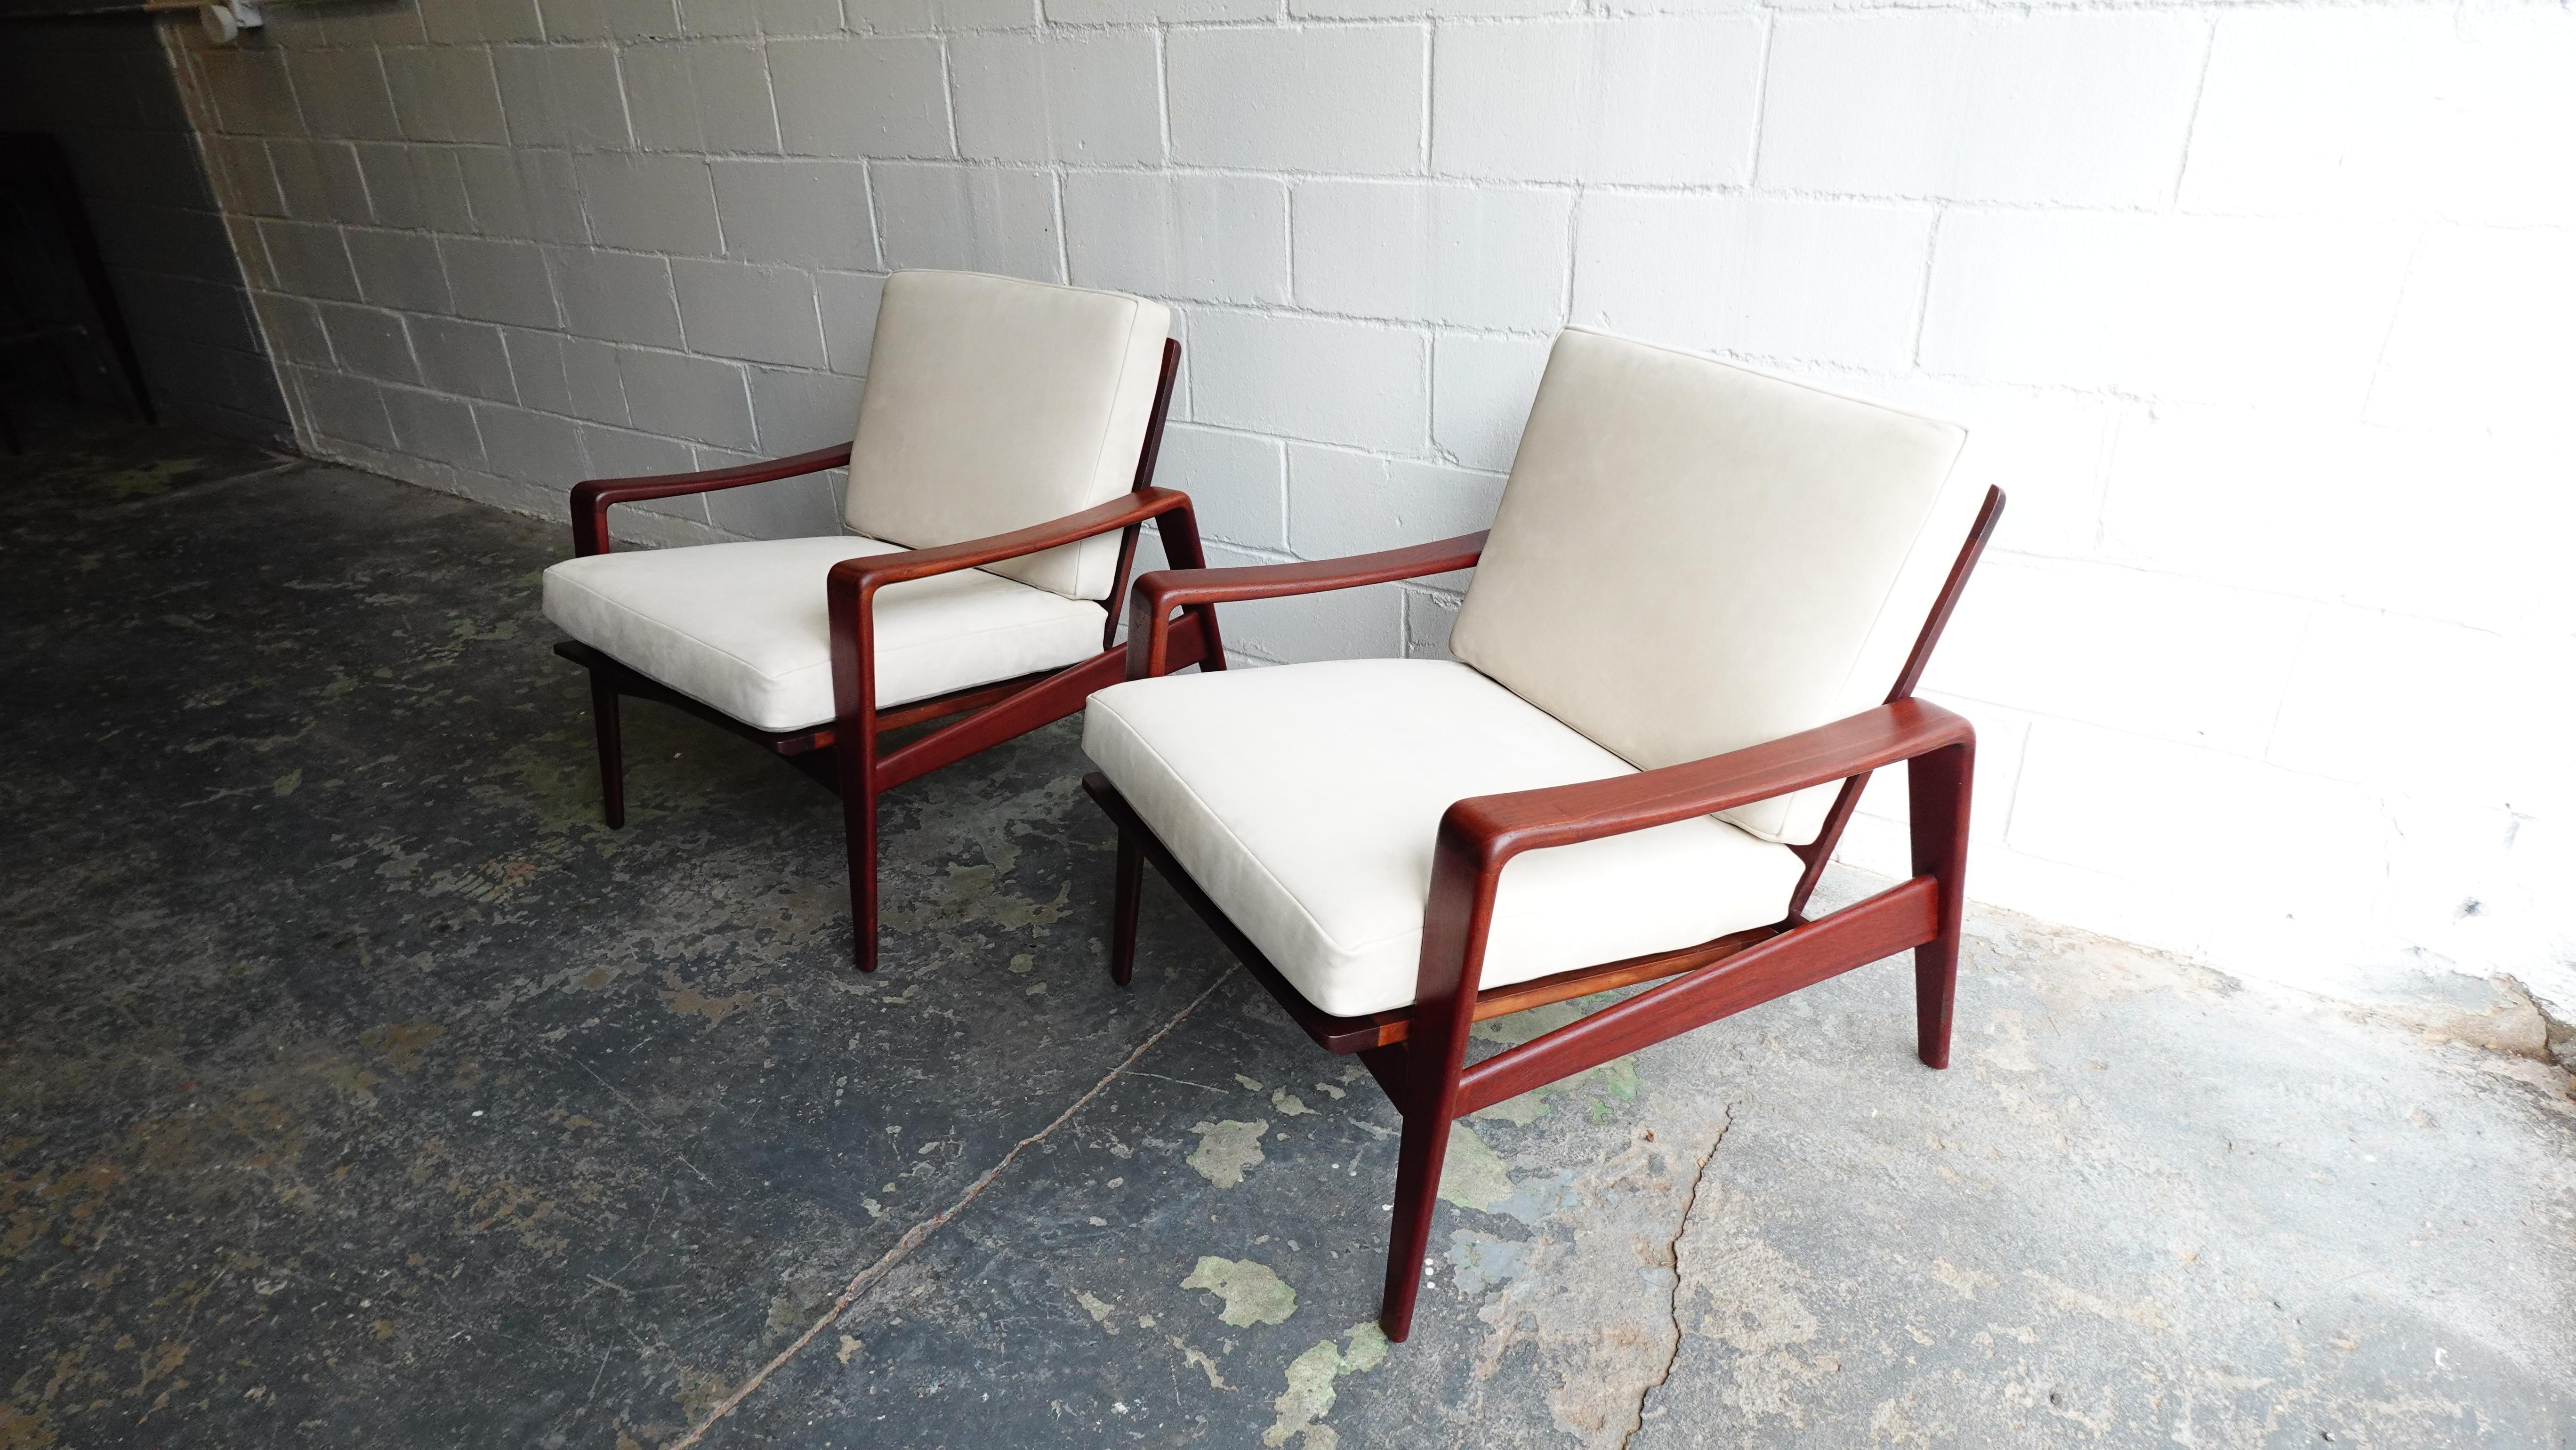 Scandinavian Modern Pair of Arne Wahl Iverson Lounge Chairs for Komfort in Teak & Leather, 1960 For Sale